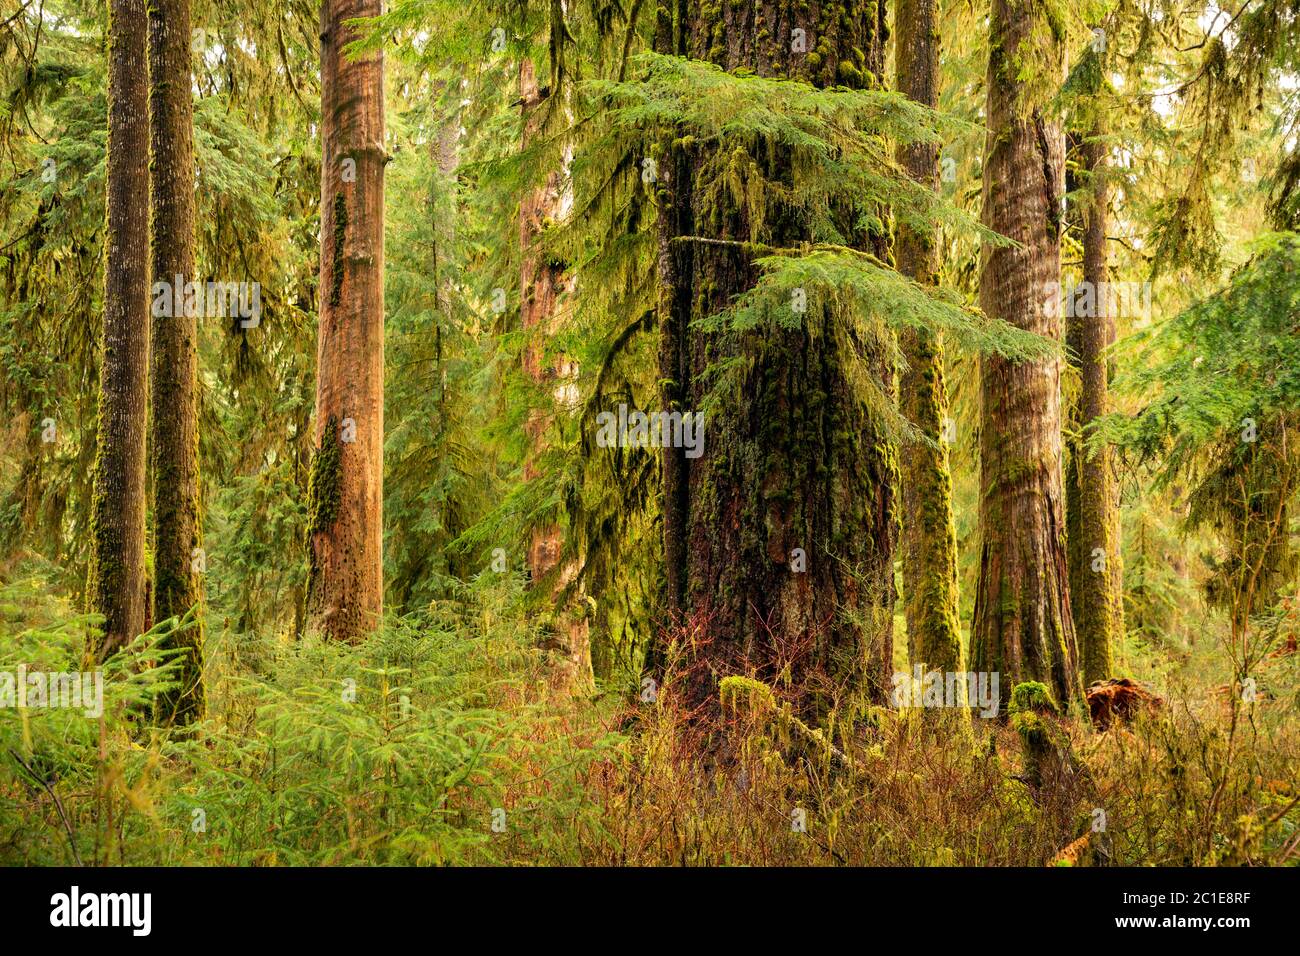 WA16787-00....WASHINGTON - Evergreen Forest entlang der Hall of Mosses Trail in der Hoh Rain Forest Abschnitt des Olympic National Park. Stockfoto